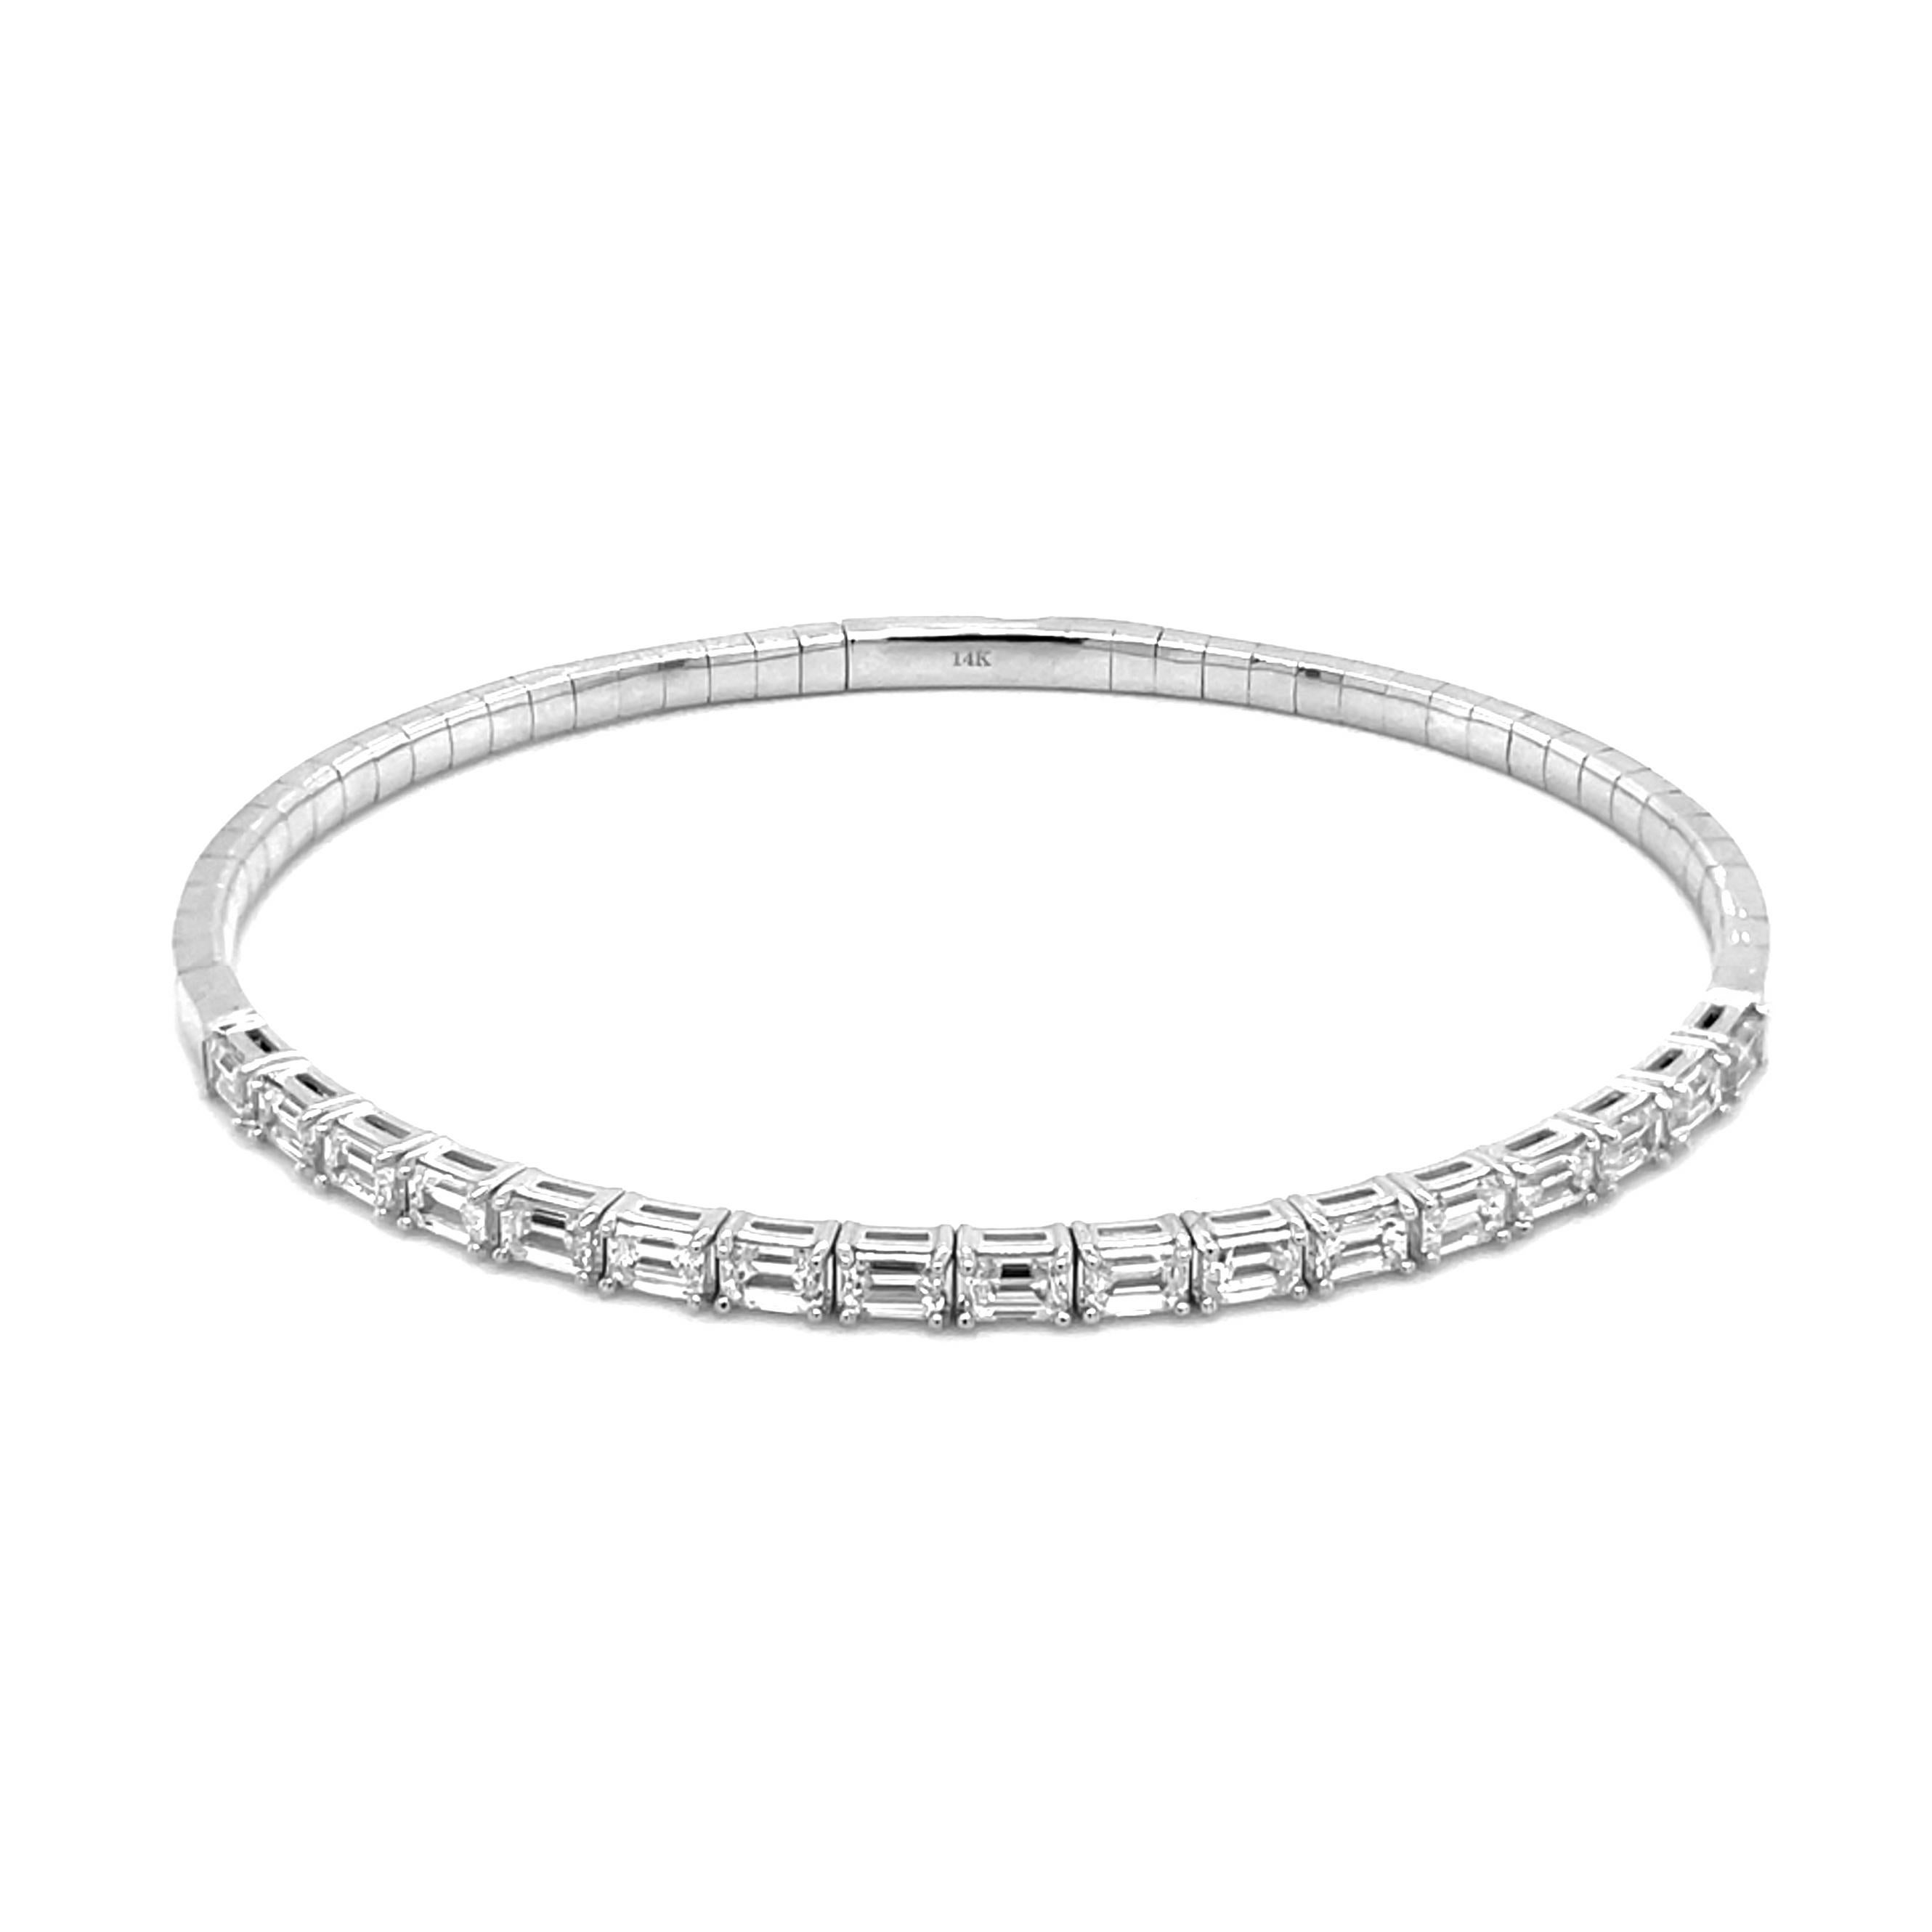 Quality Flexible Bangle: Made from real 14k gold with 17 glittering emerald cut white diamonds approximately 2.26 ct. Certified diamonds, featuring a single row of emerald cut white diamonds flexible diameter for comfort with a color and clarity of